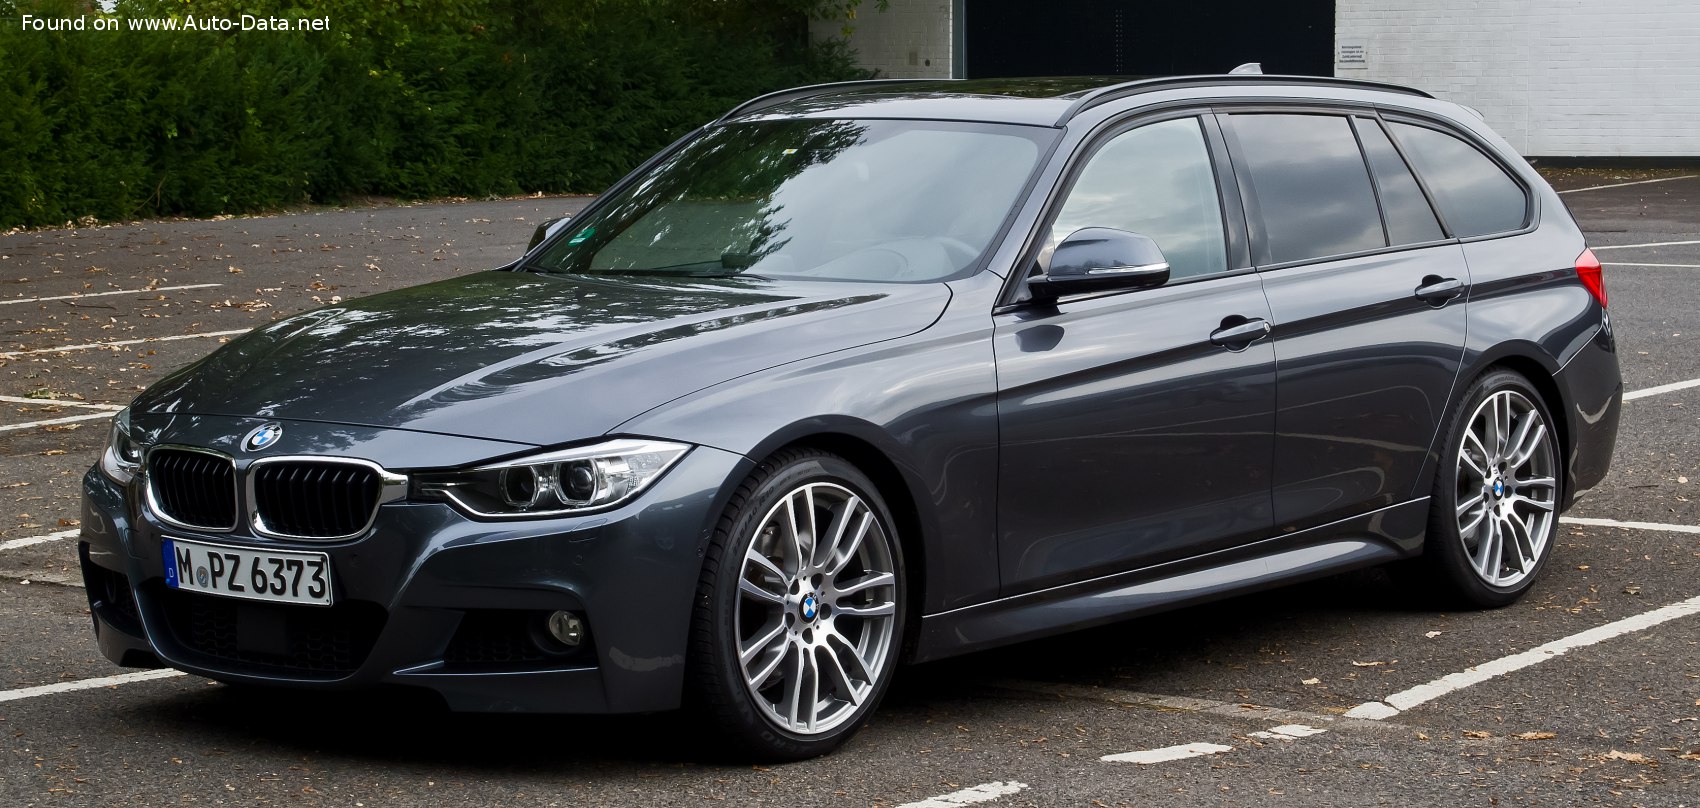 2012 BMW 3 Series Touring 318d (143 Hp) | Technical data, fuel consumption,